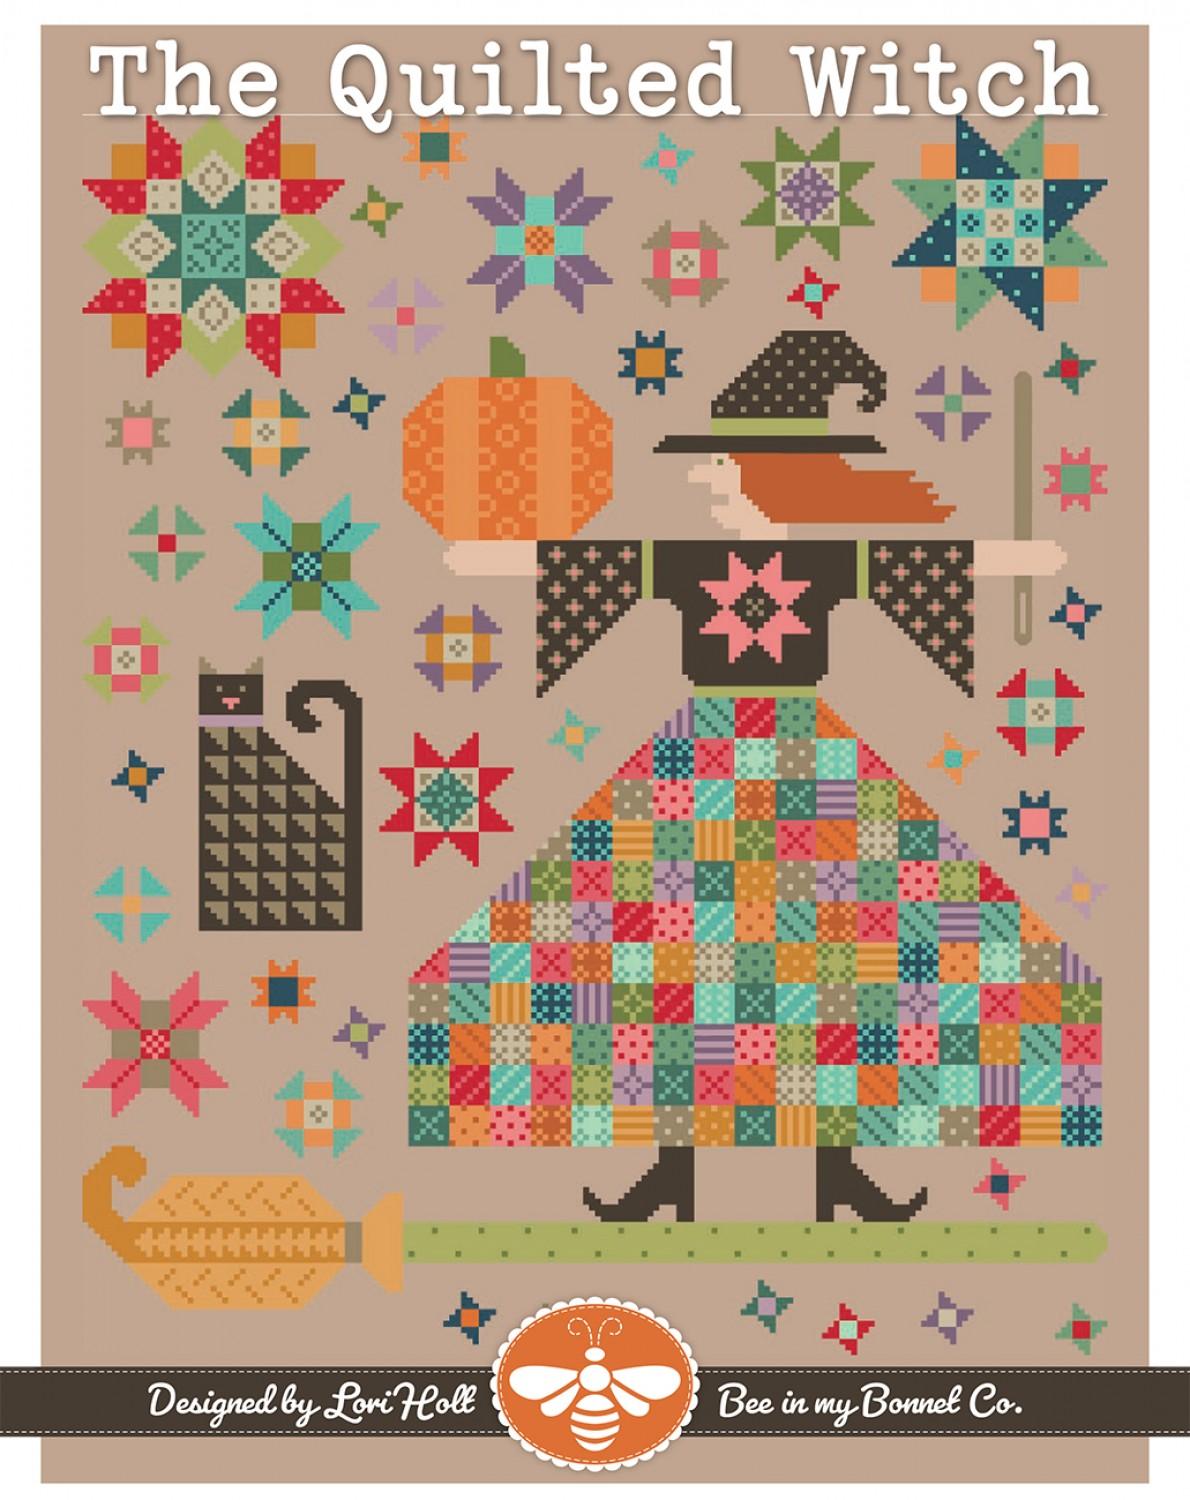 The Quilted Witch It's Sew Emma - Quiltique